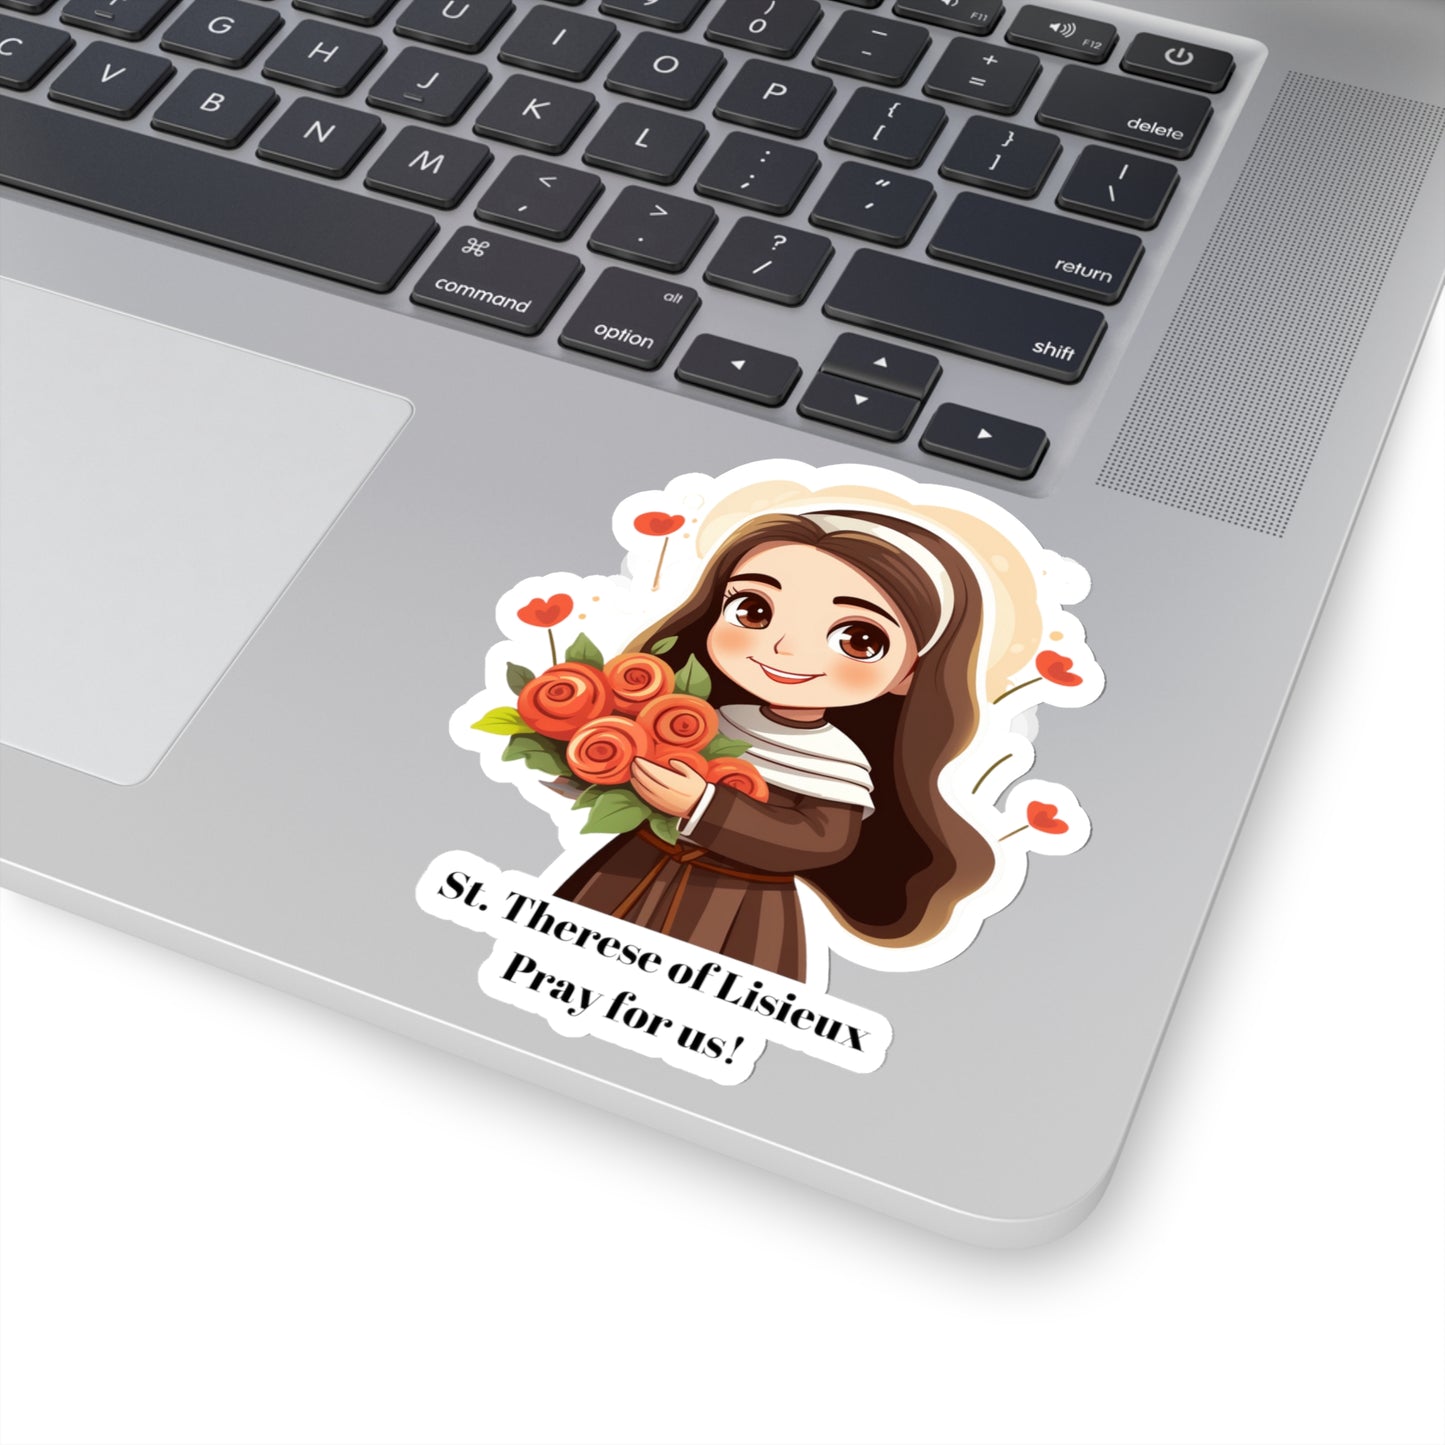 St. Therese of Lisieux Pray for us, sticker